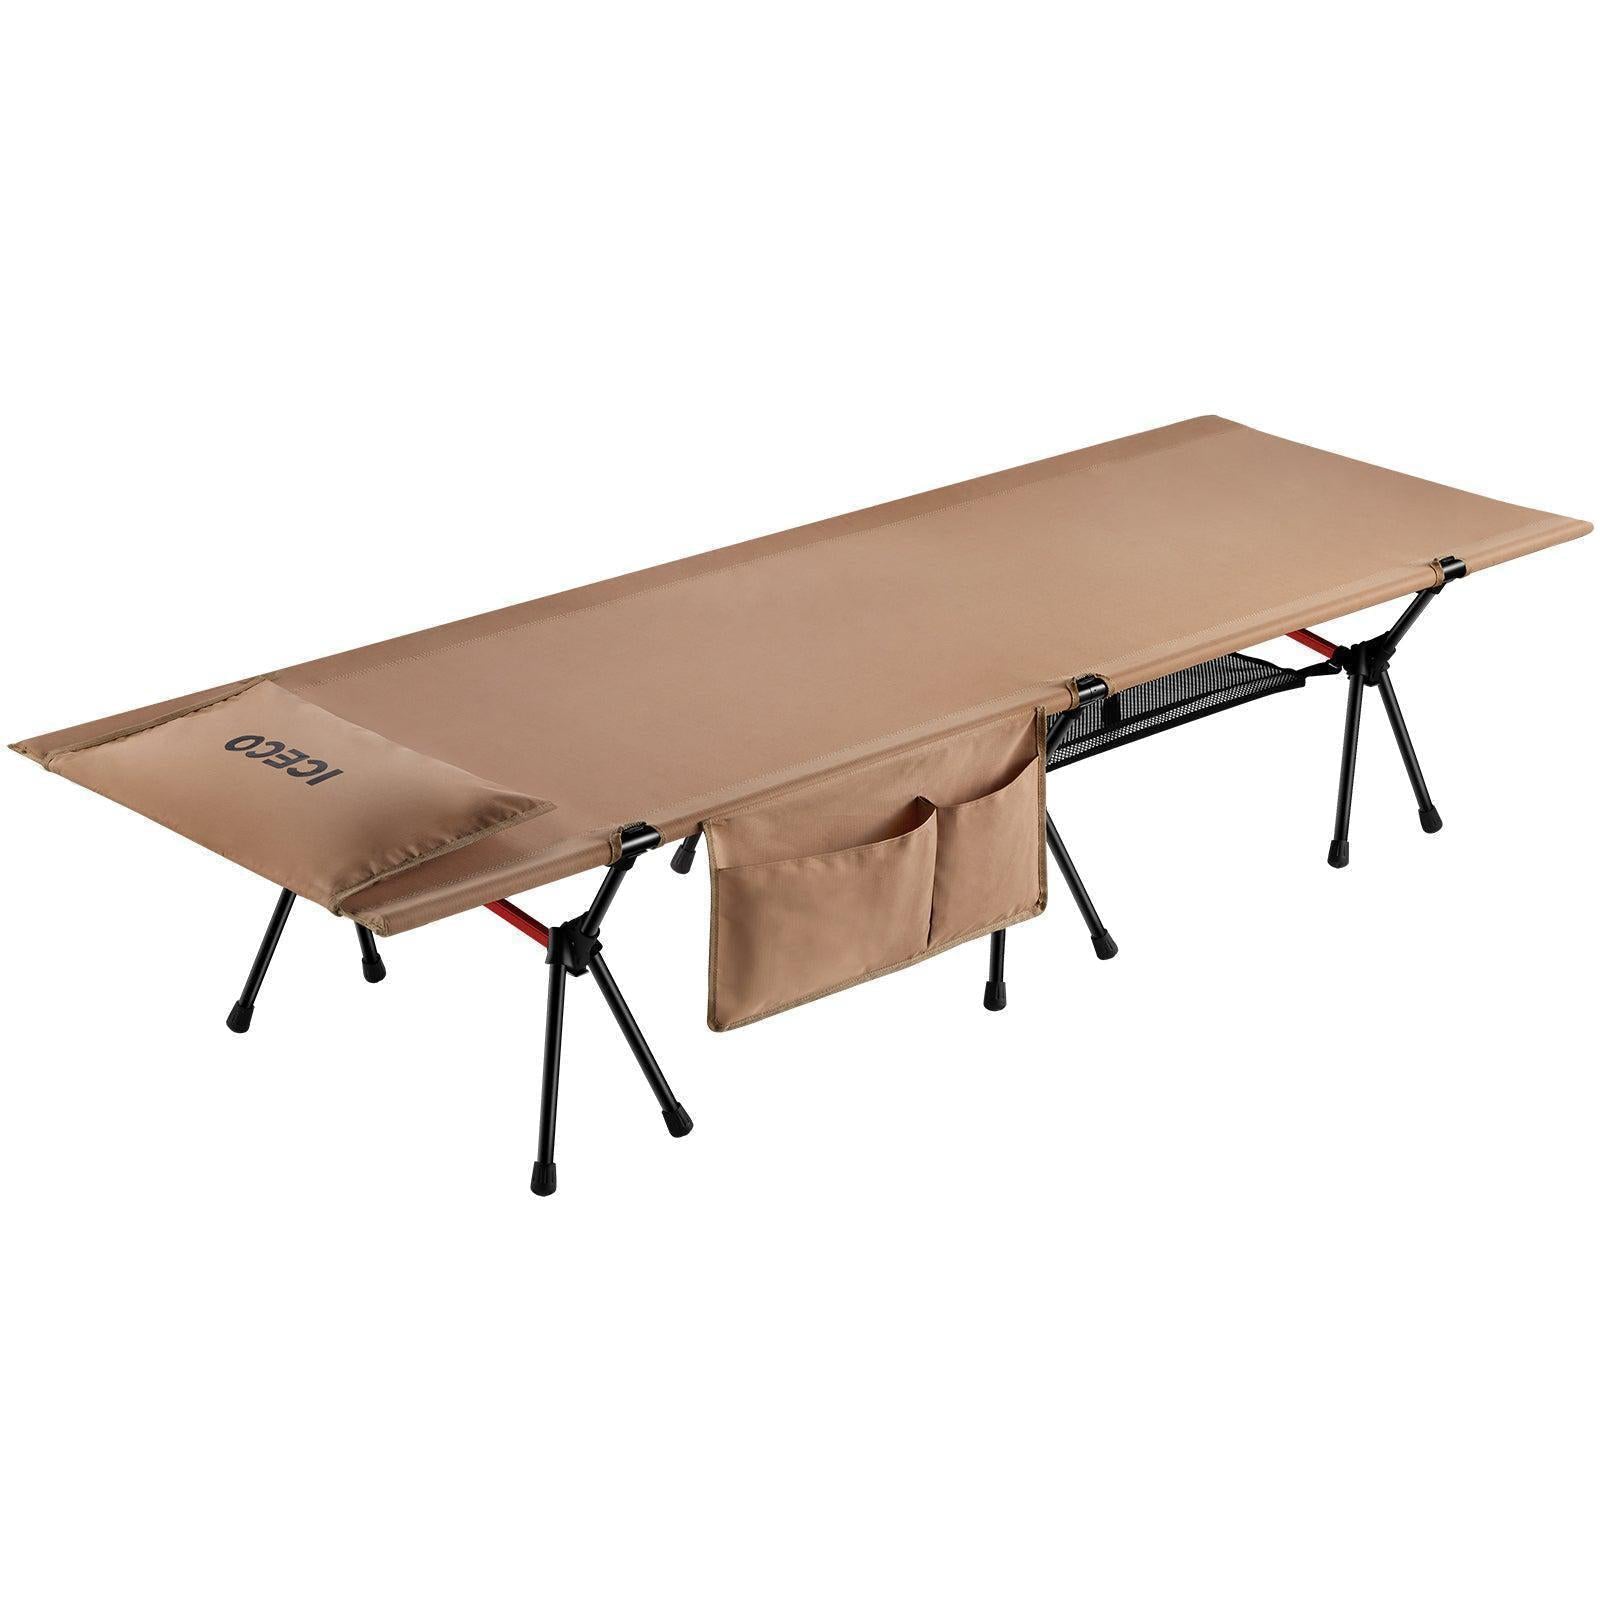 Portable Camping Cot khaki | ICECO-Outdoor Gear-www.icecofreezer.com